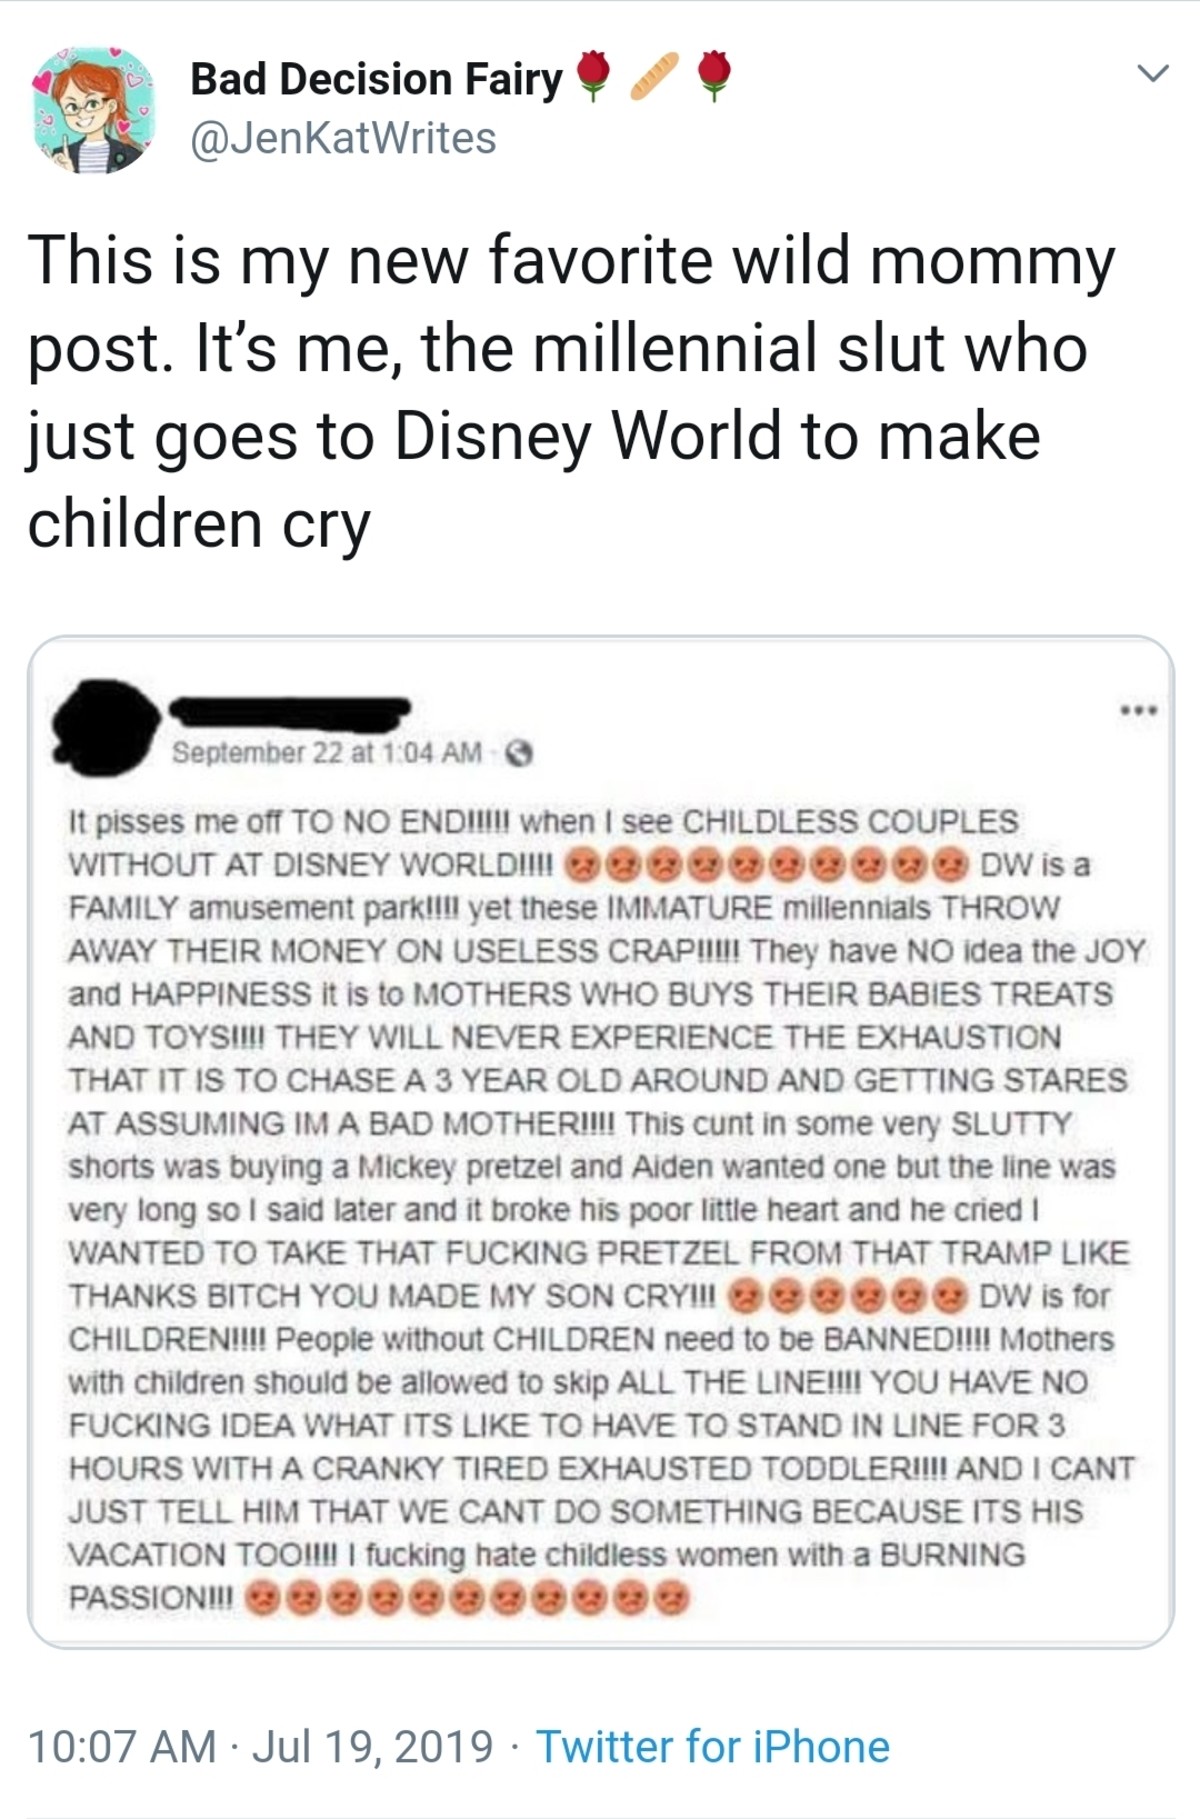 Typical millennials. .. Sounds like a bitch who got knocked up by her highschool sweetheart and ended up trapped in a marriage where their feelings for each other were eroded by the la